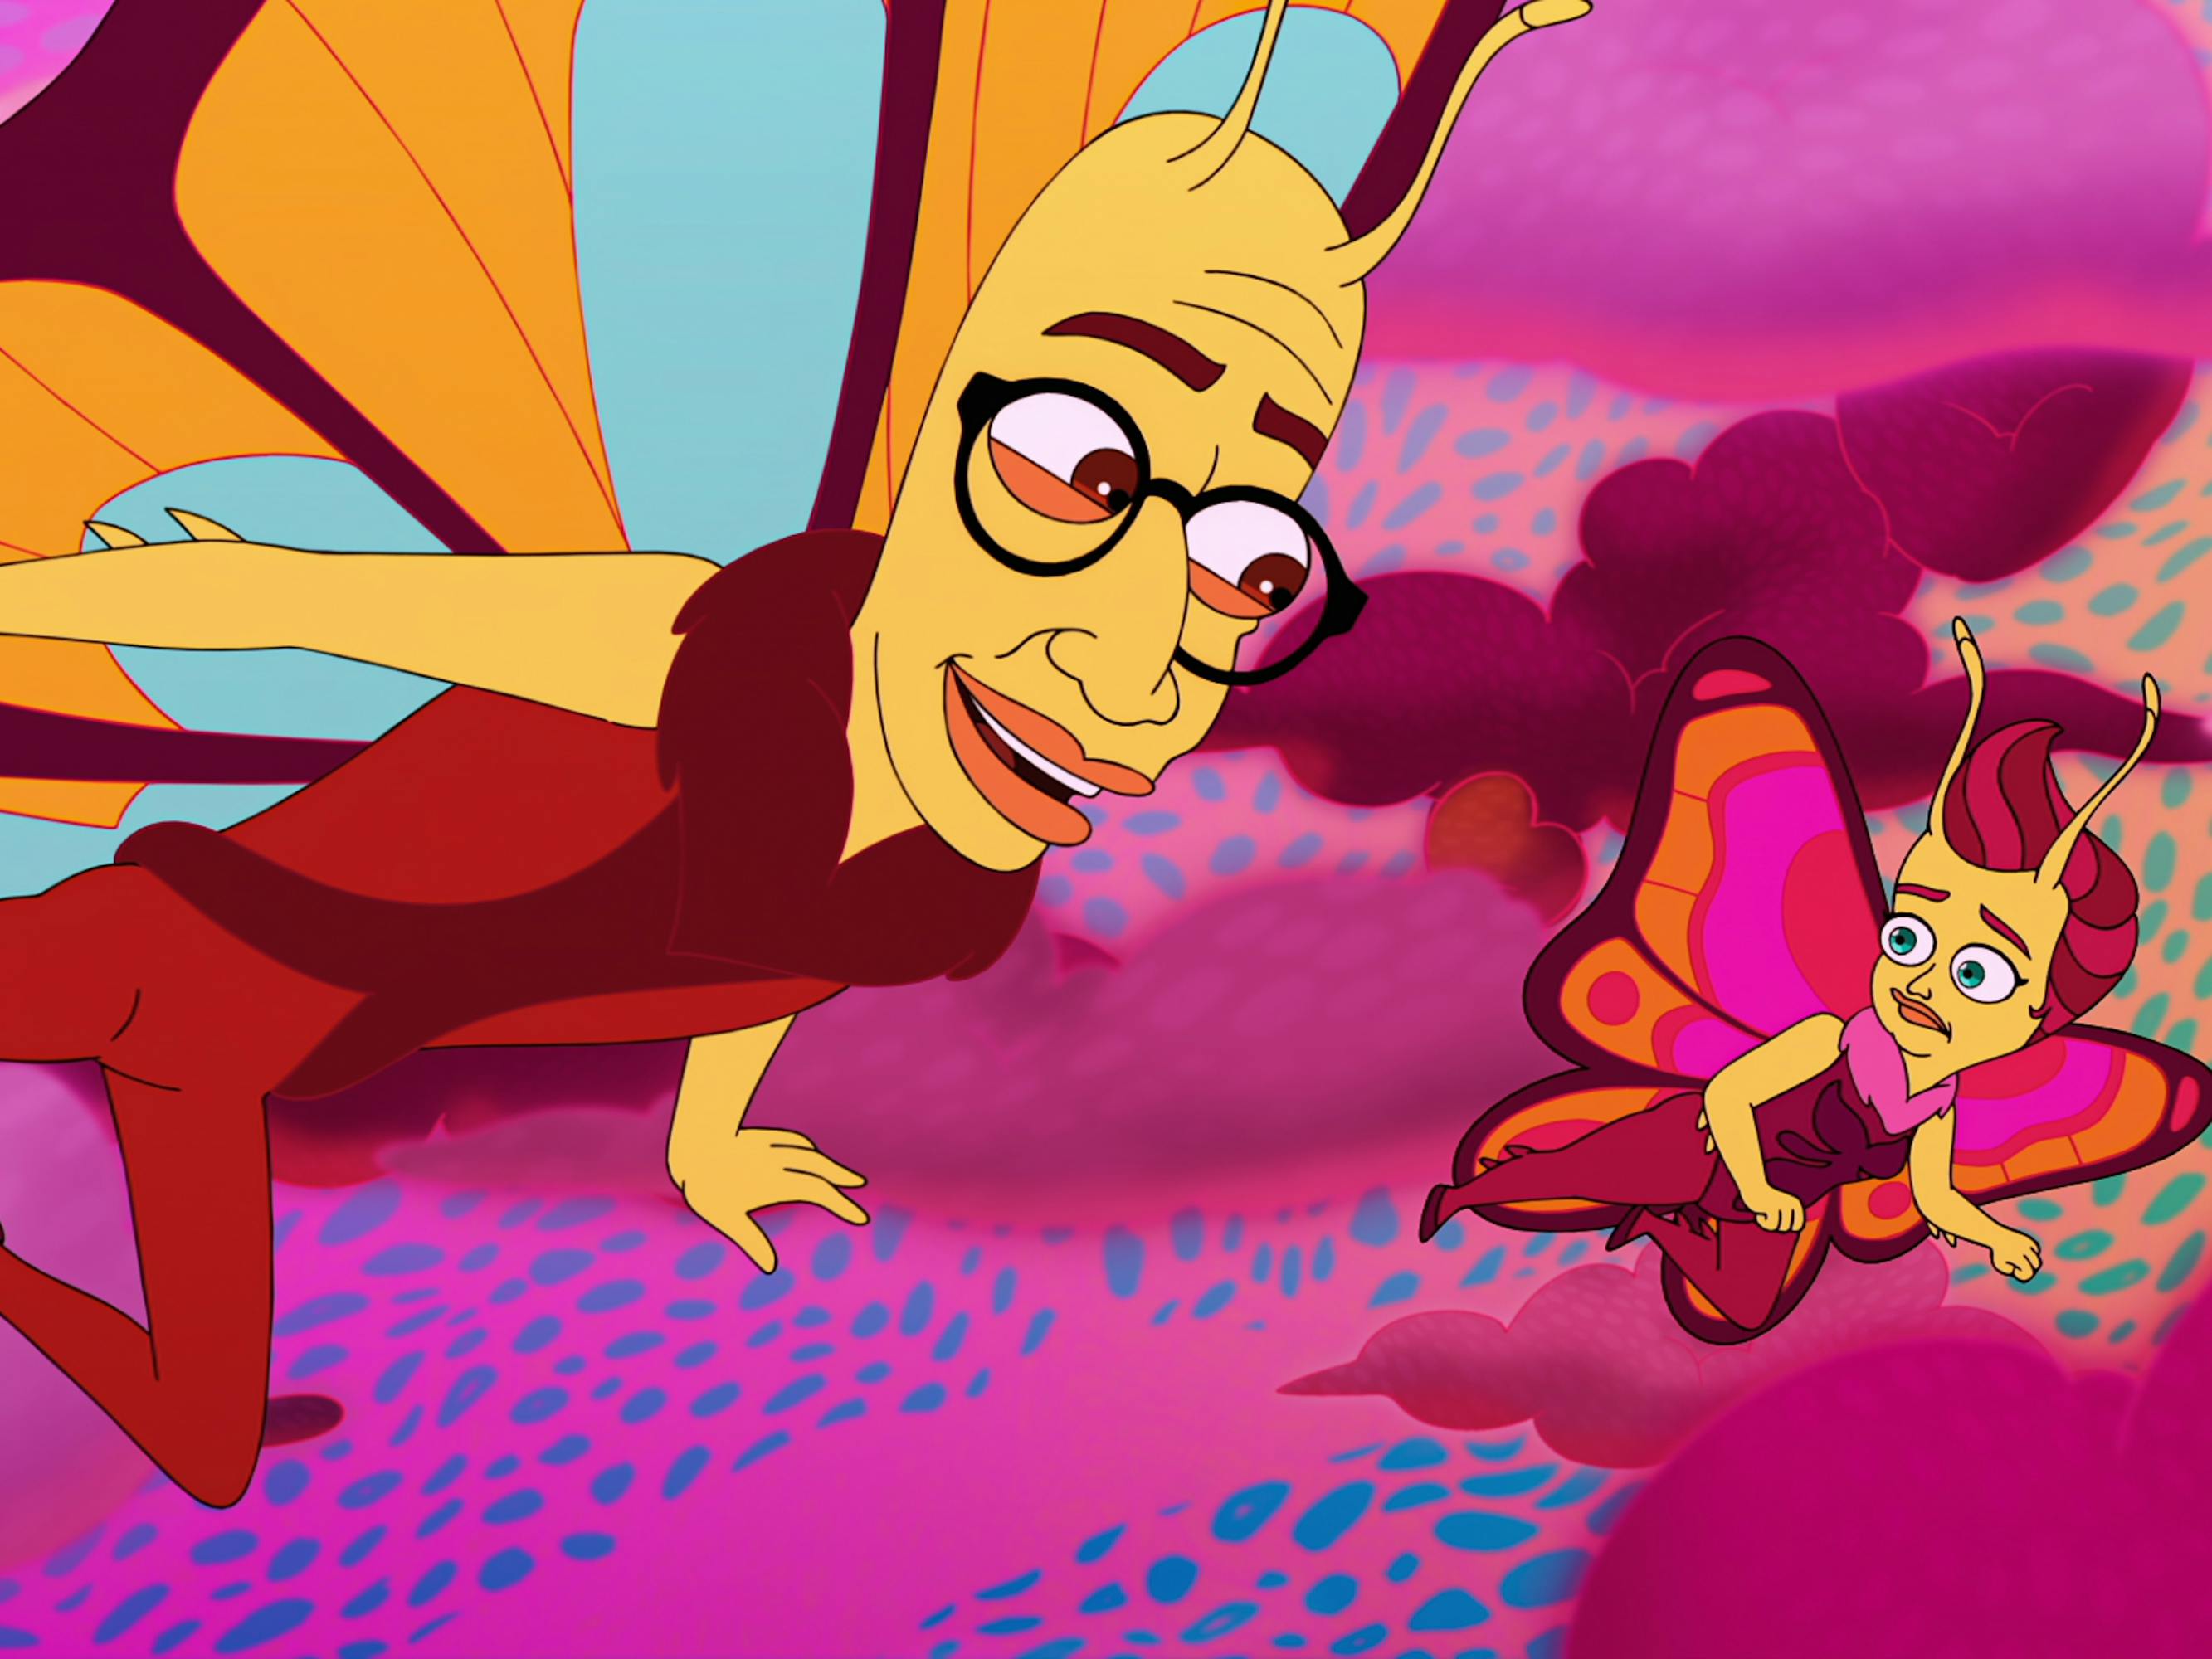 Walter the Lovebug (Brandon Kyle Goodman) and Emmy the Lovebug (Aidy Bryant) float through a pink, cloudy world. The ground is speckled with blue and green spots.